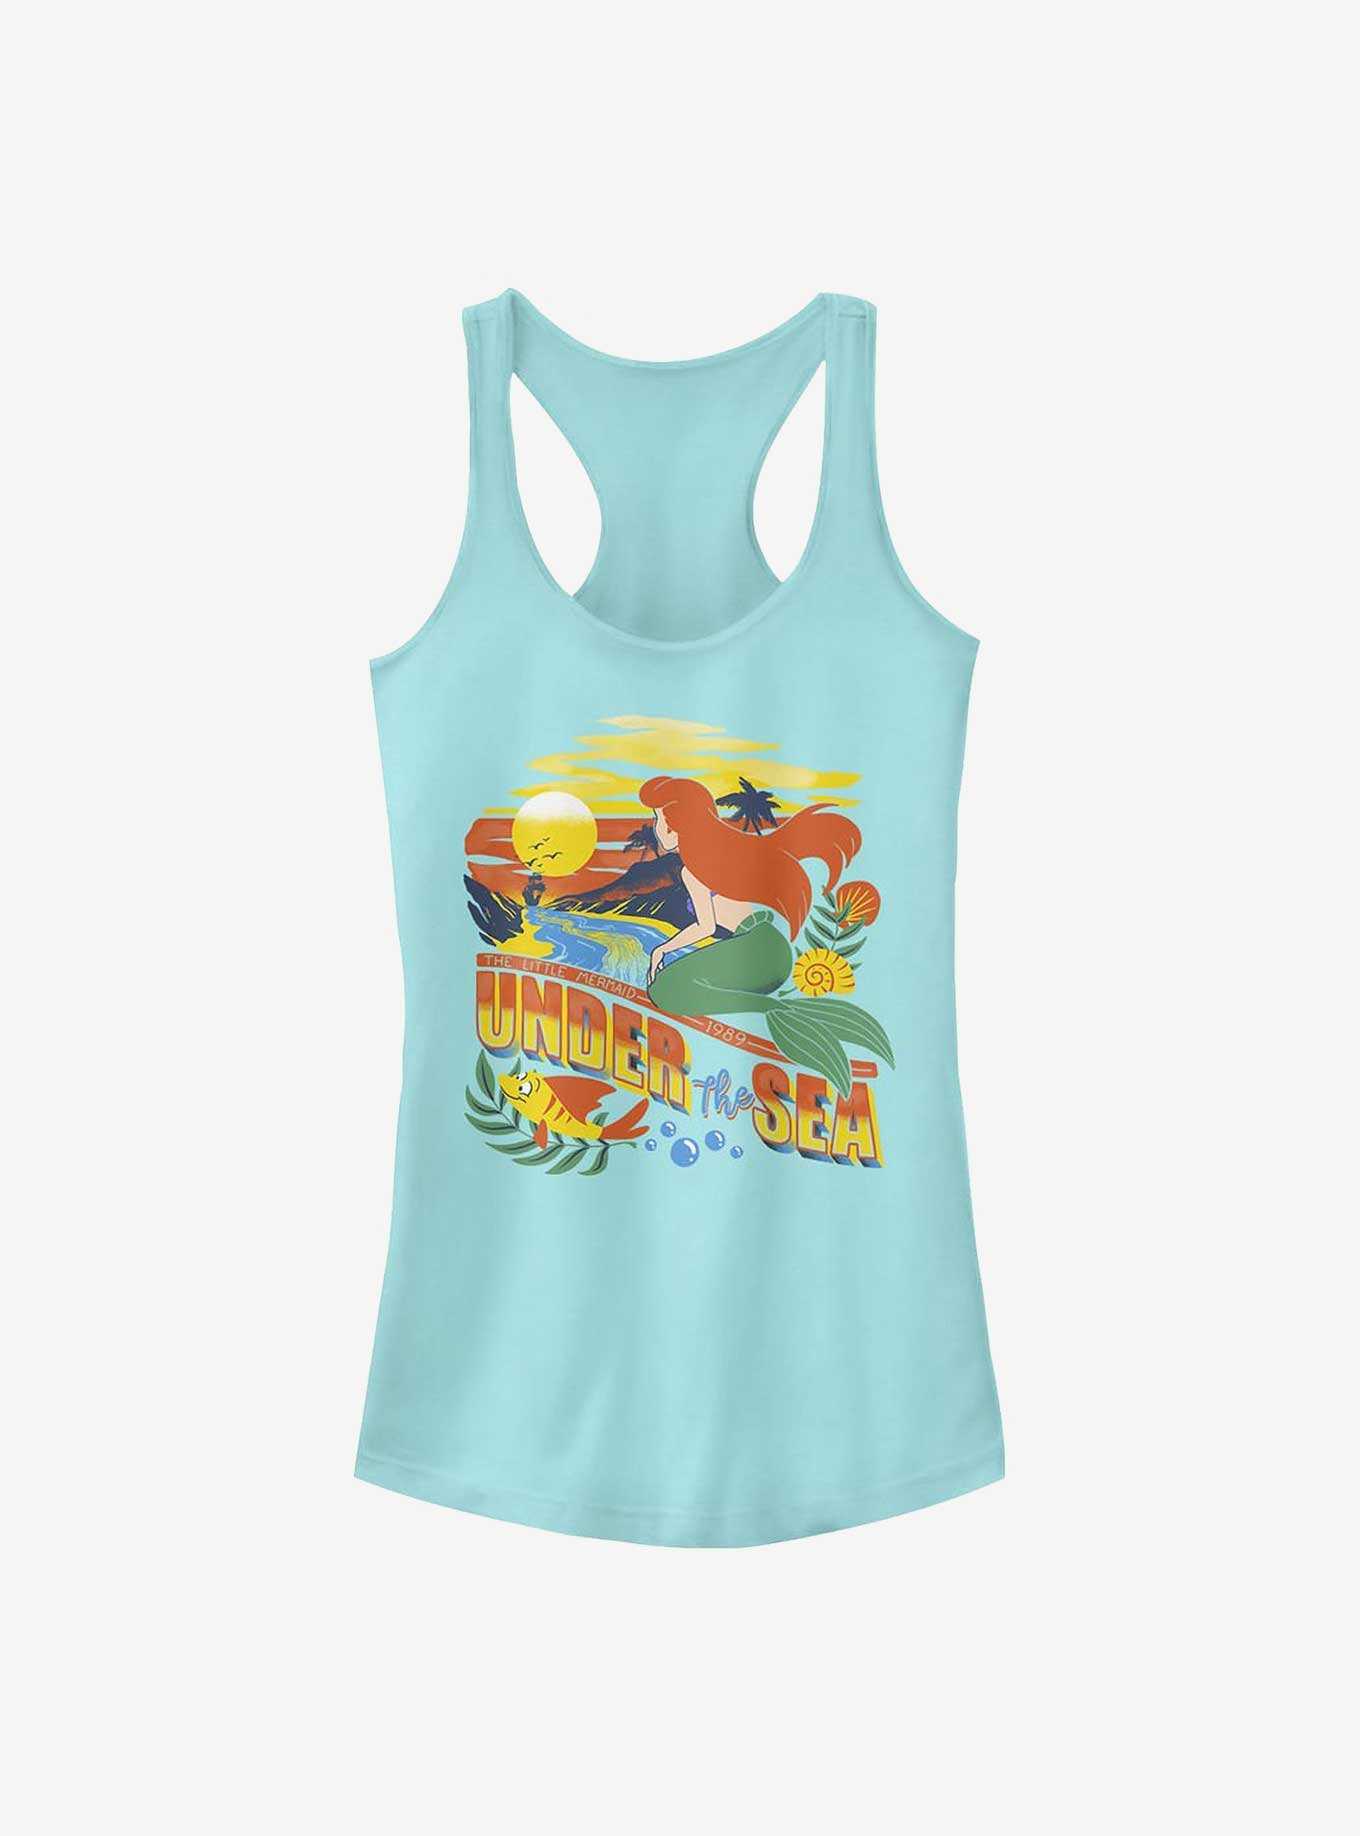 Disney The Little Mermaid Part Of Your World Over The Horizon Girls Tank, , hi-res